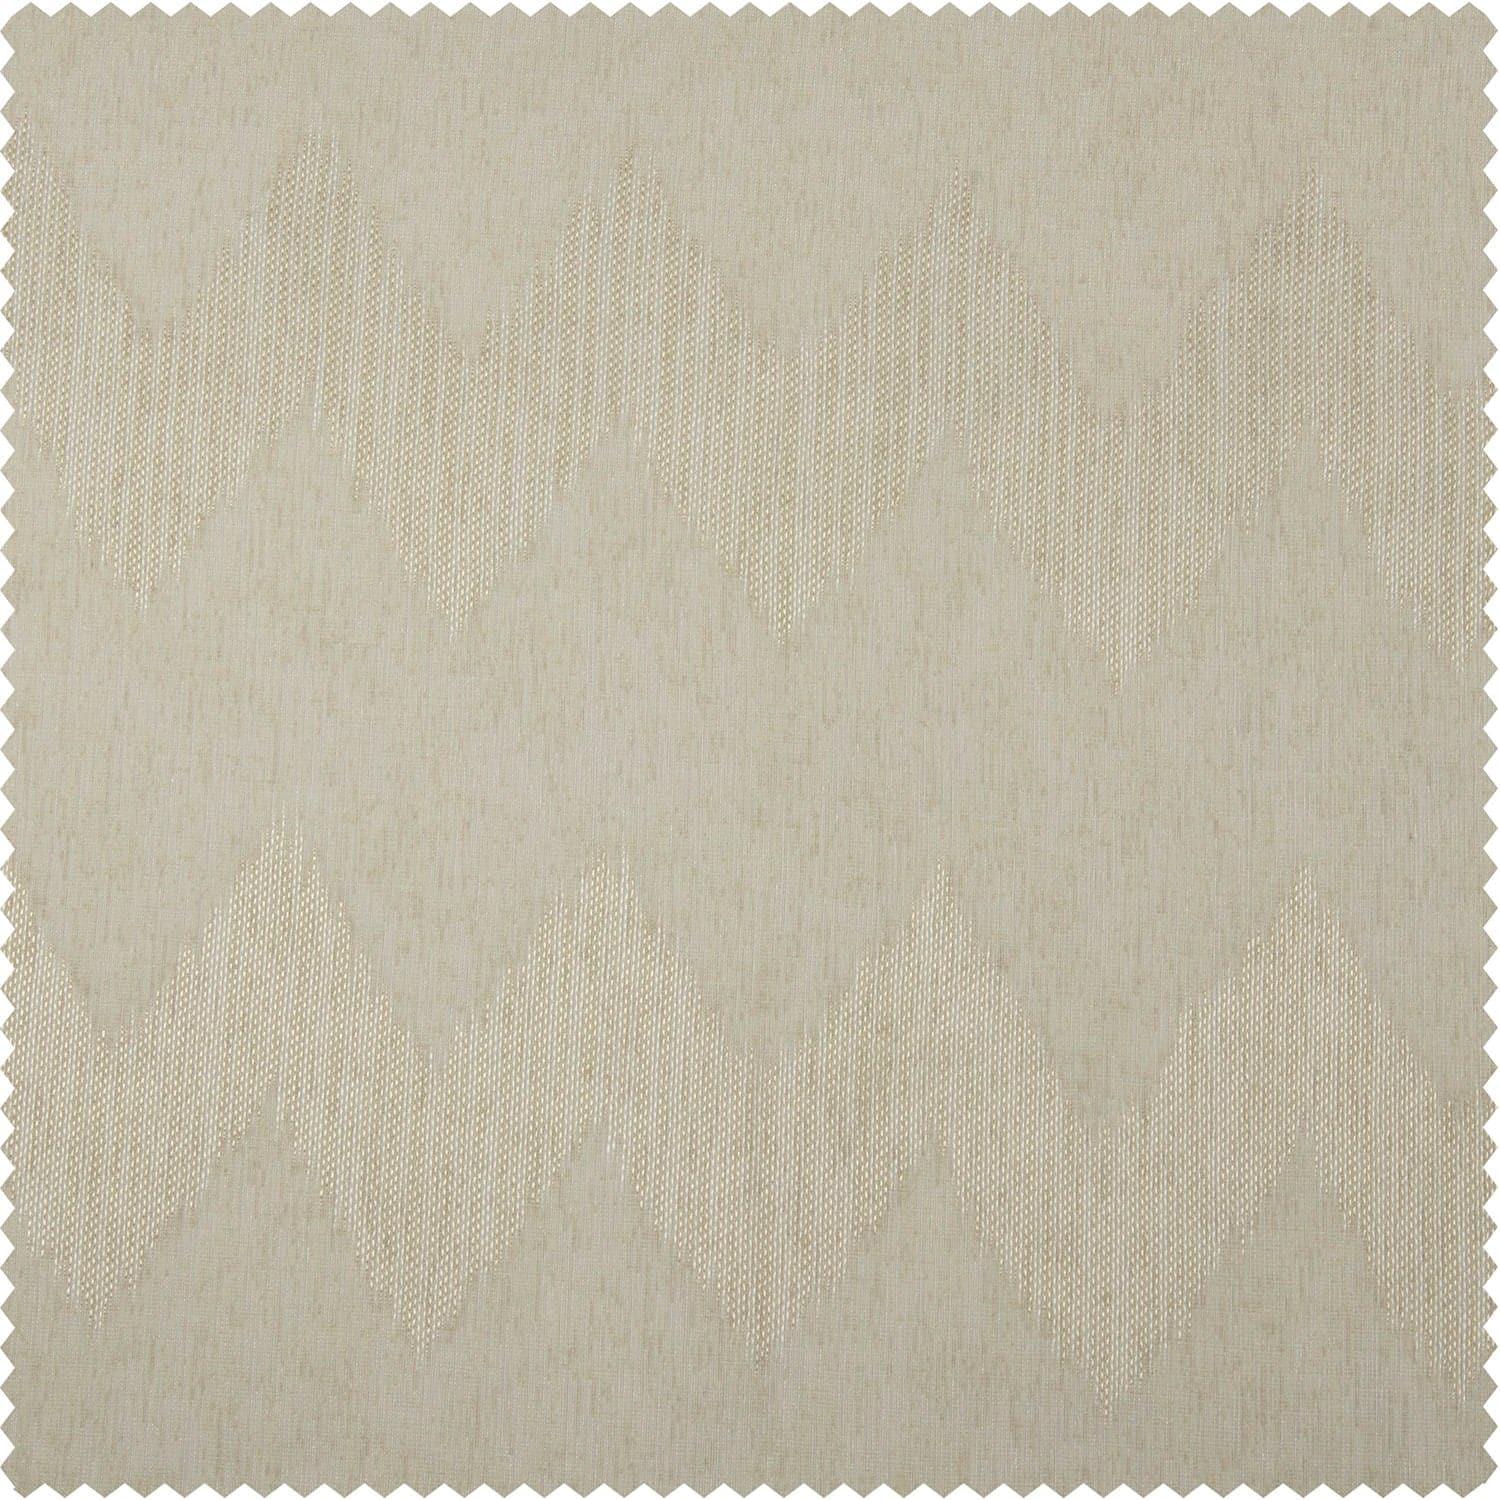 Sirius Beige Patterned Faux Linen Sheer Curtain